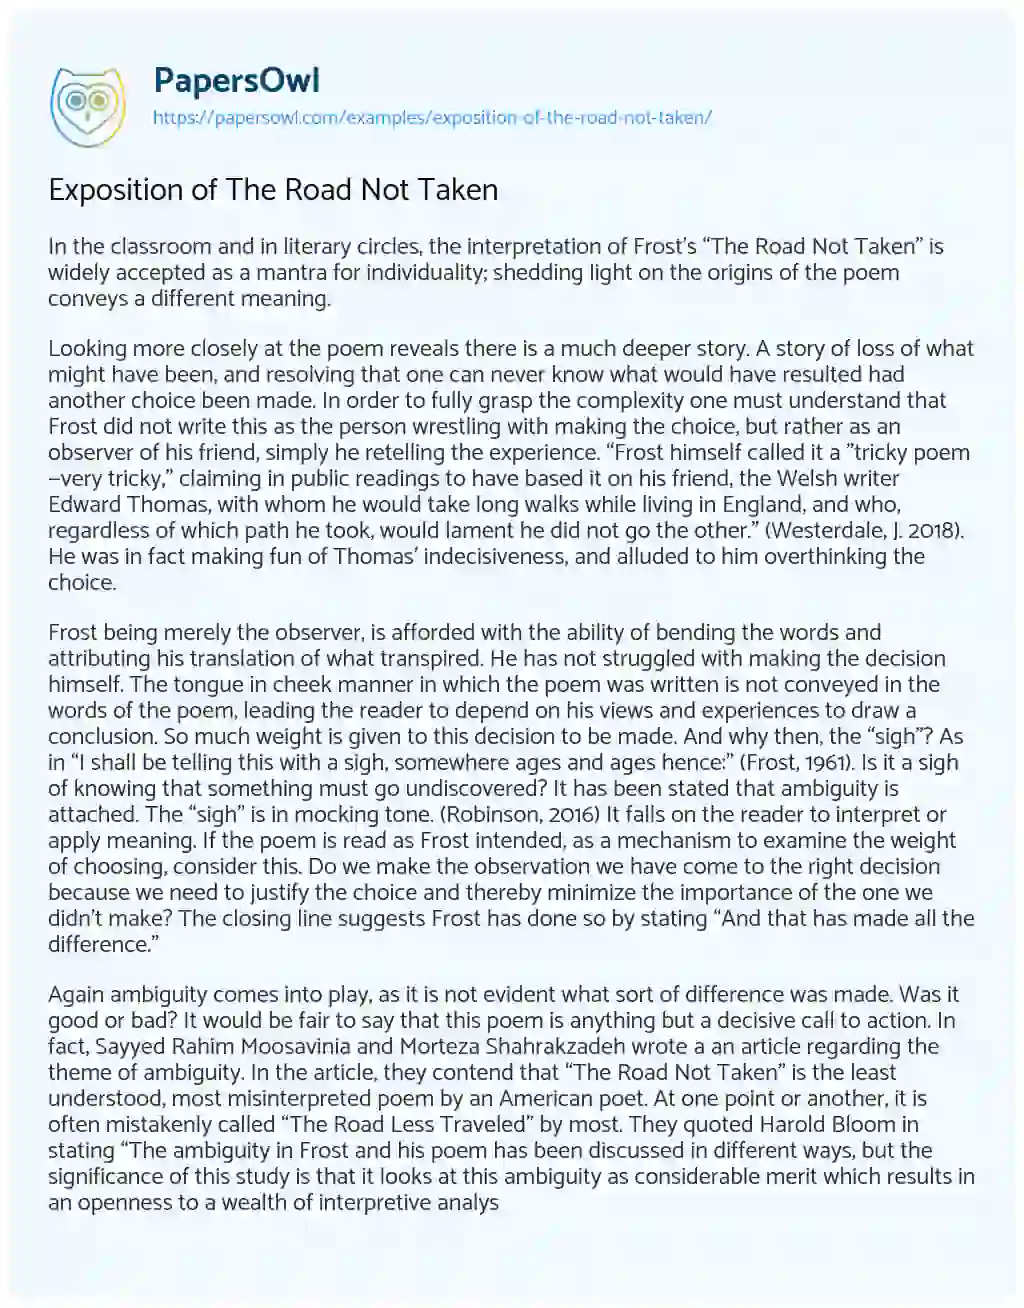 Essay on Exposition of the Road not Taken